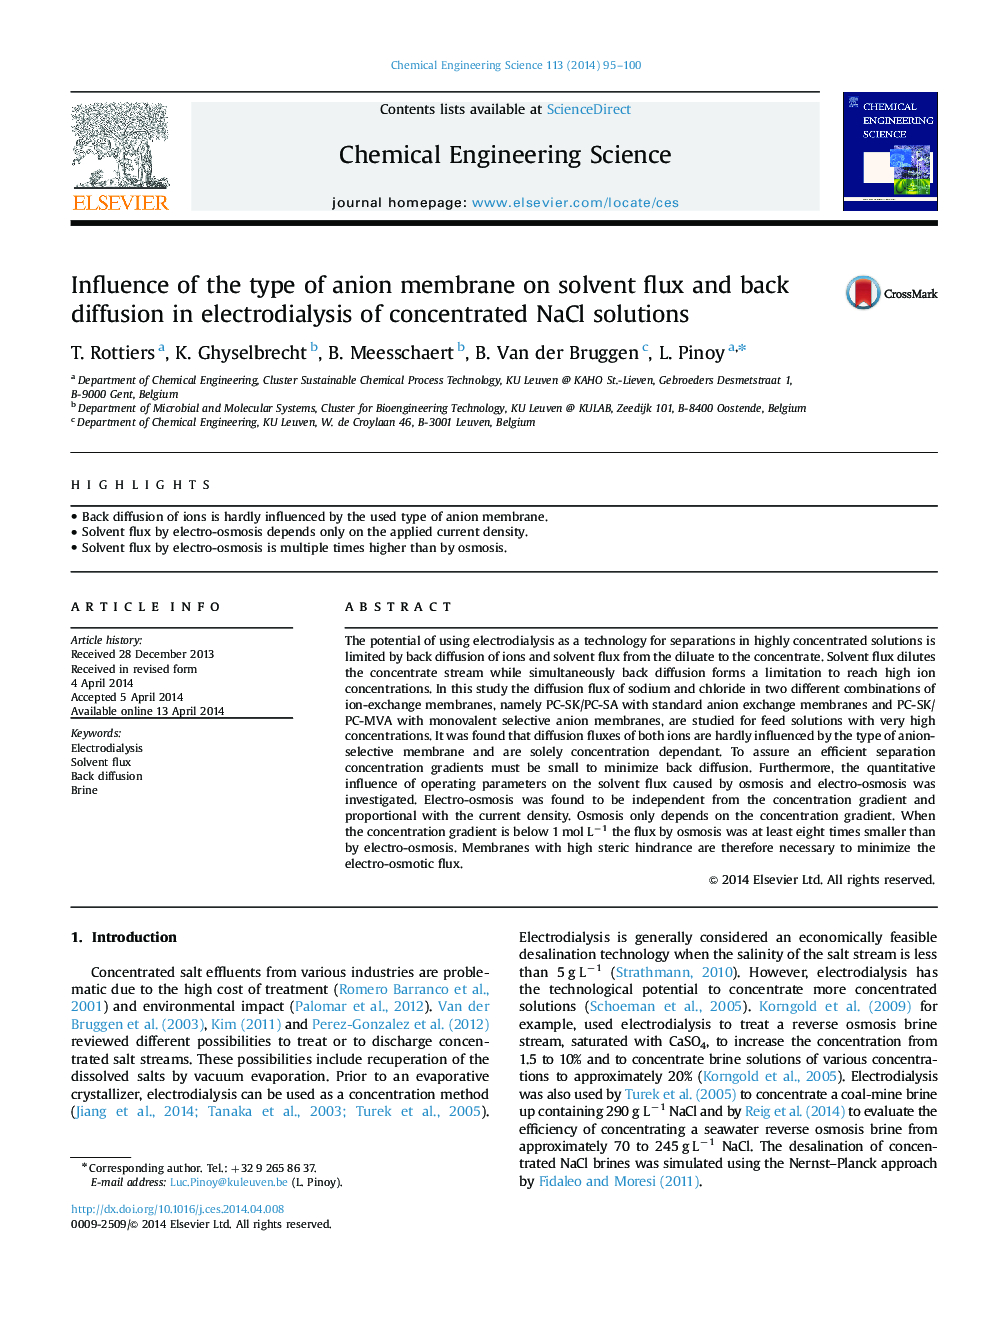 Influence of the type of anion membrane on solvent flux and back diffusion in electrodialysis of concentrated NaCl solutions